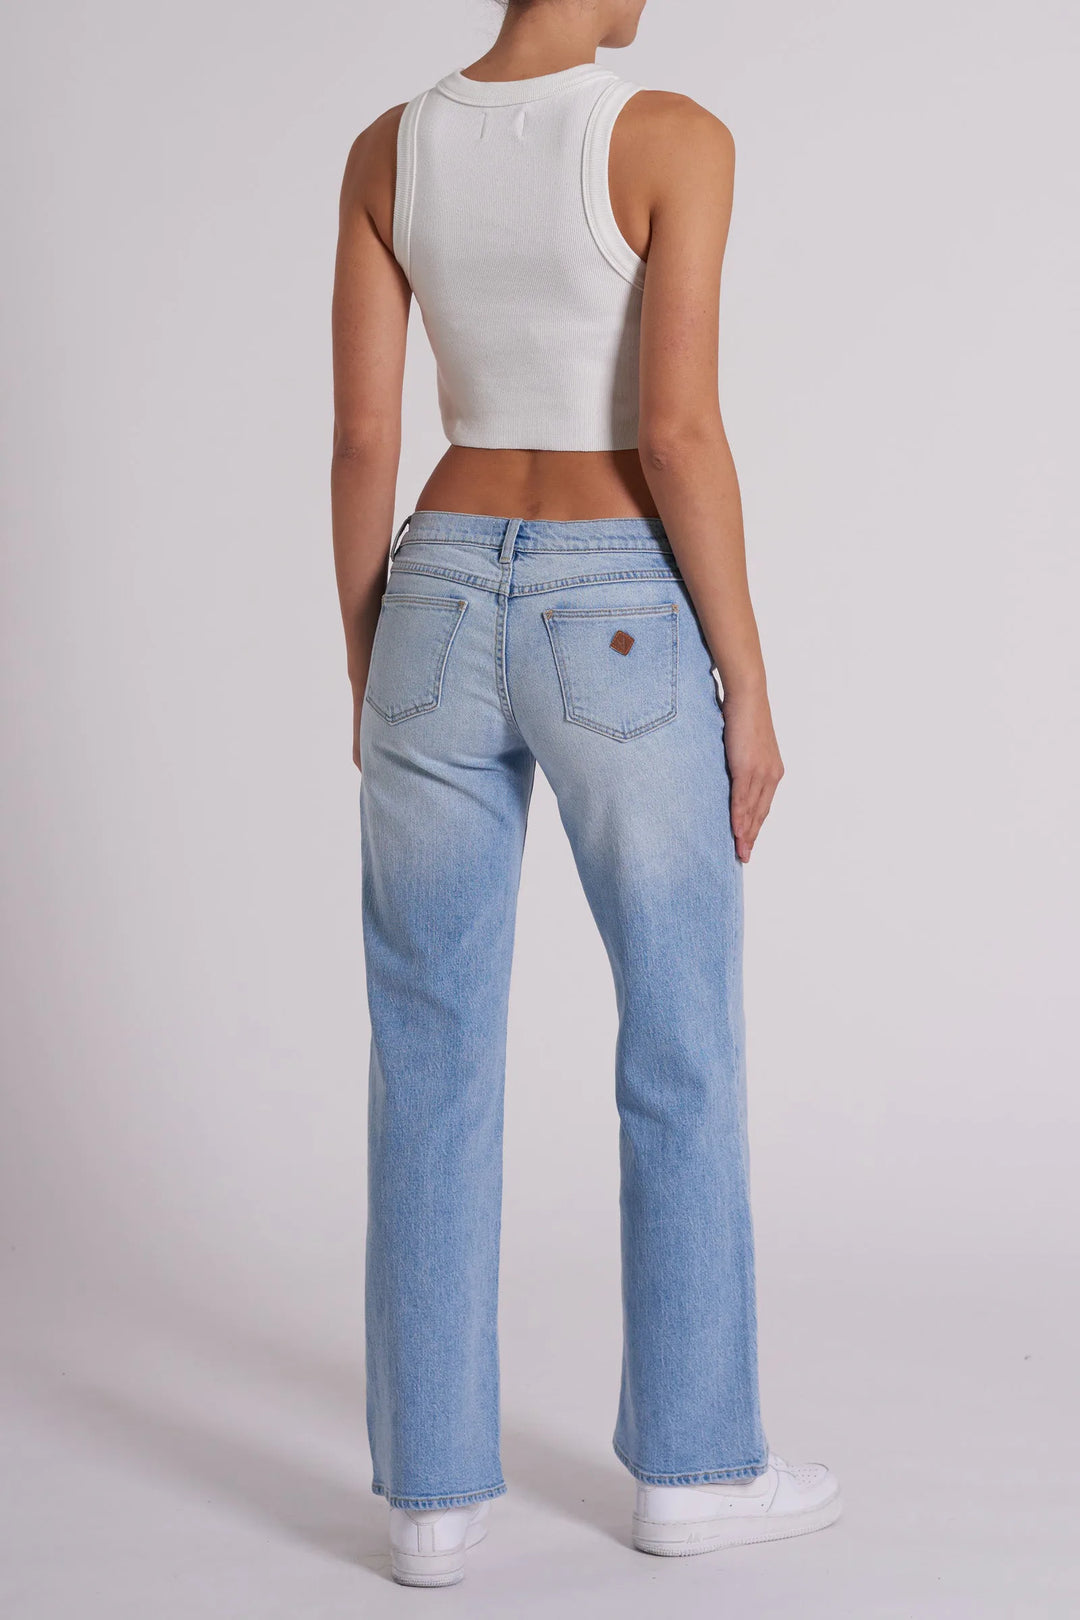 Abrand 99 Low & Wide Jean- Kylee Recycled